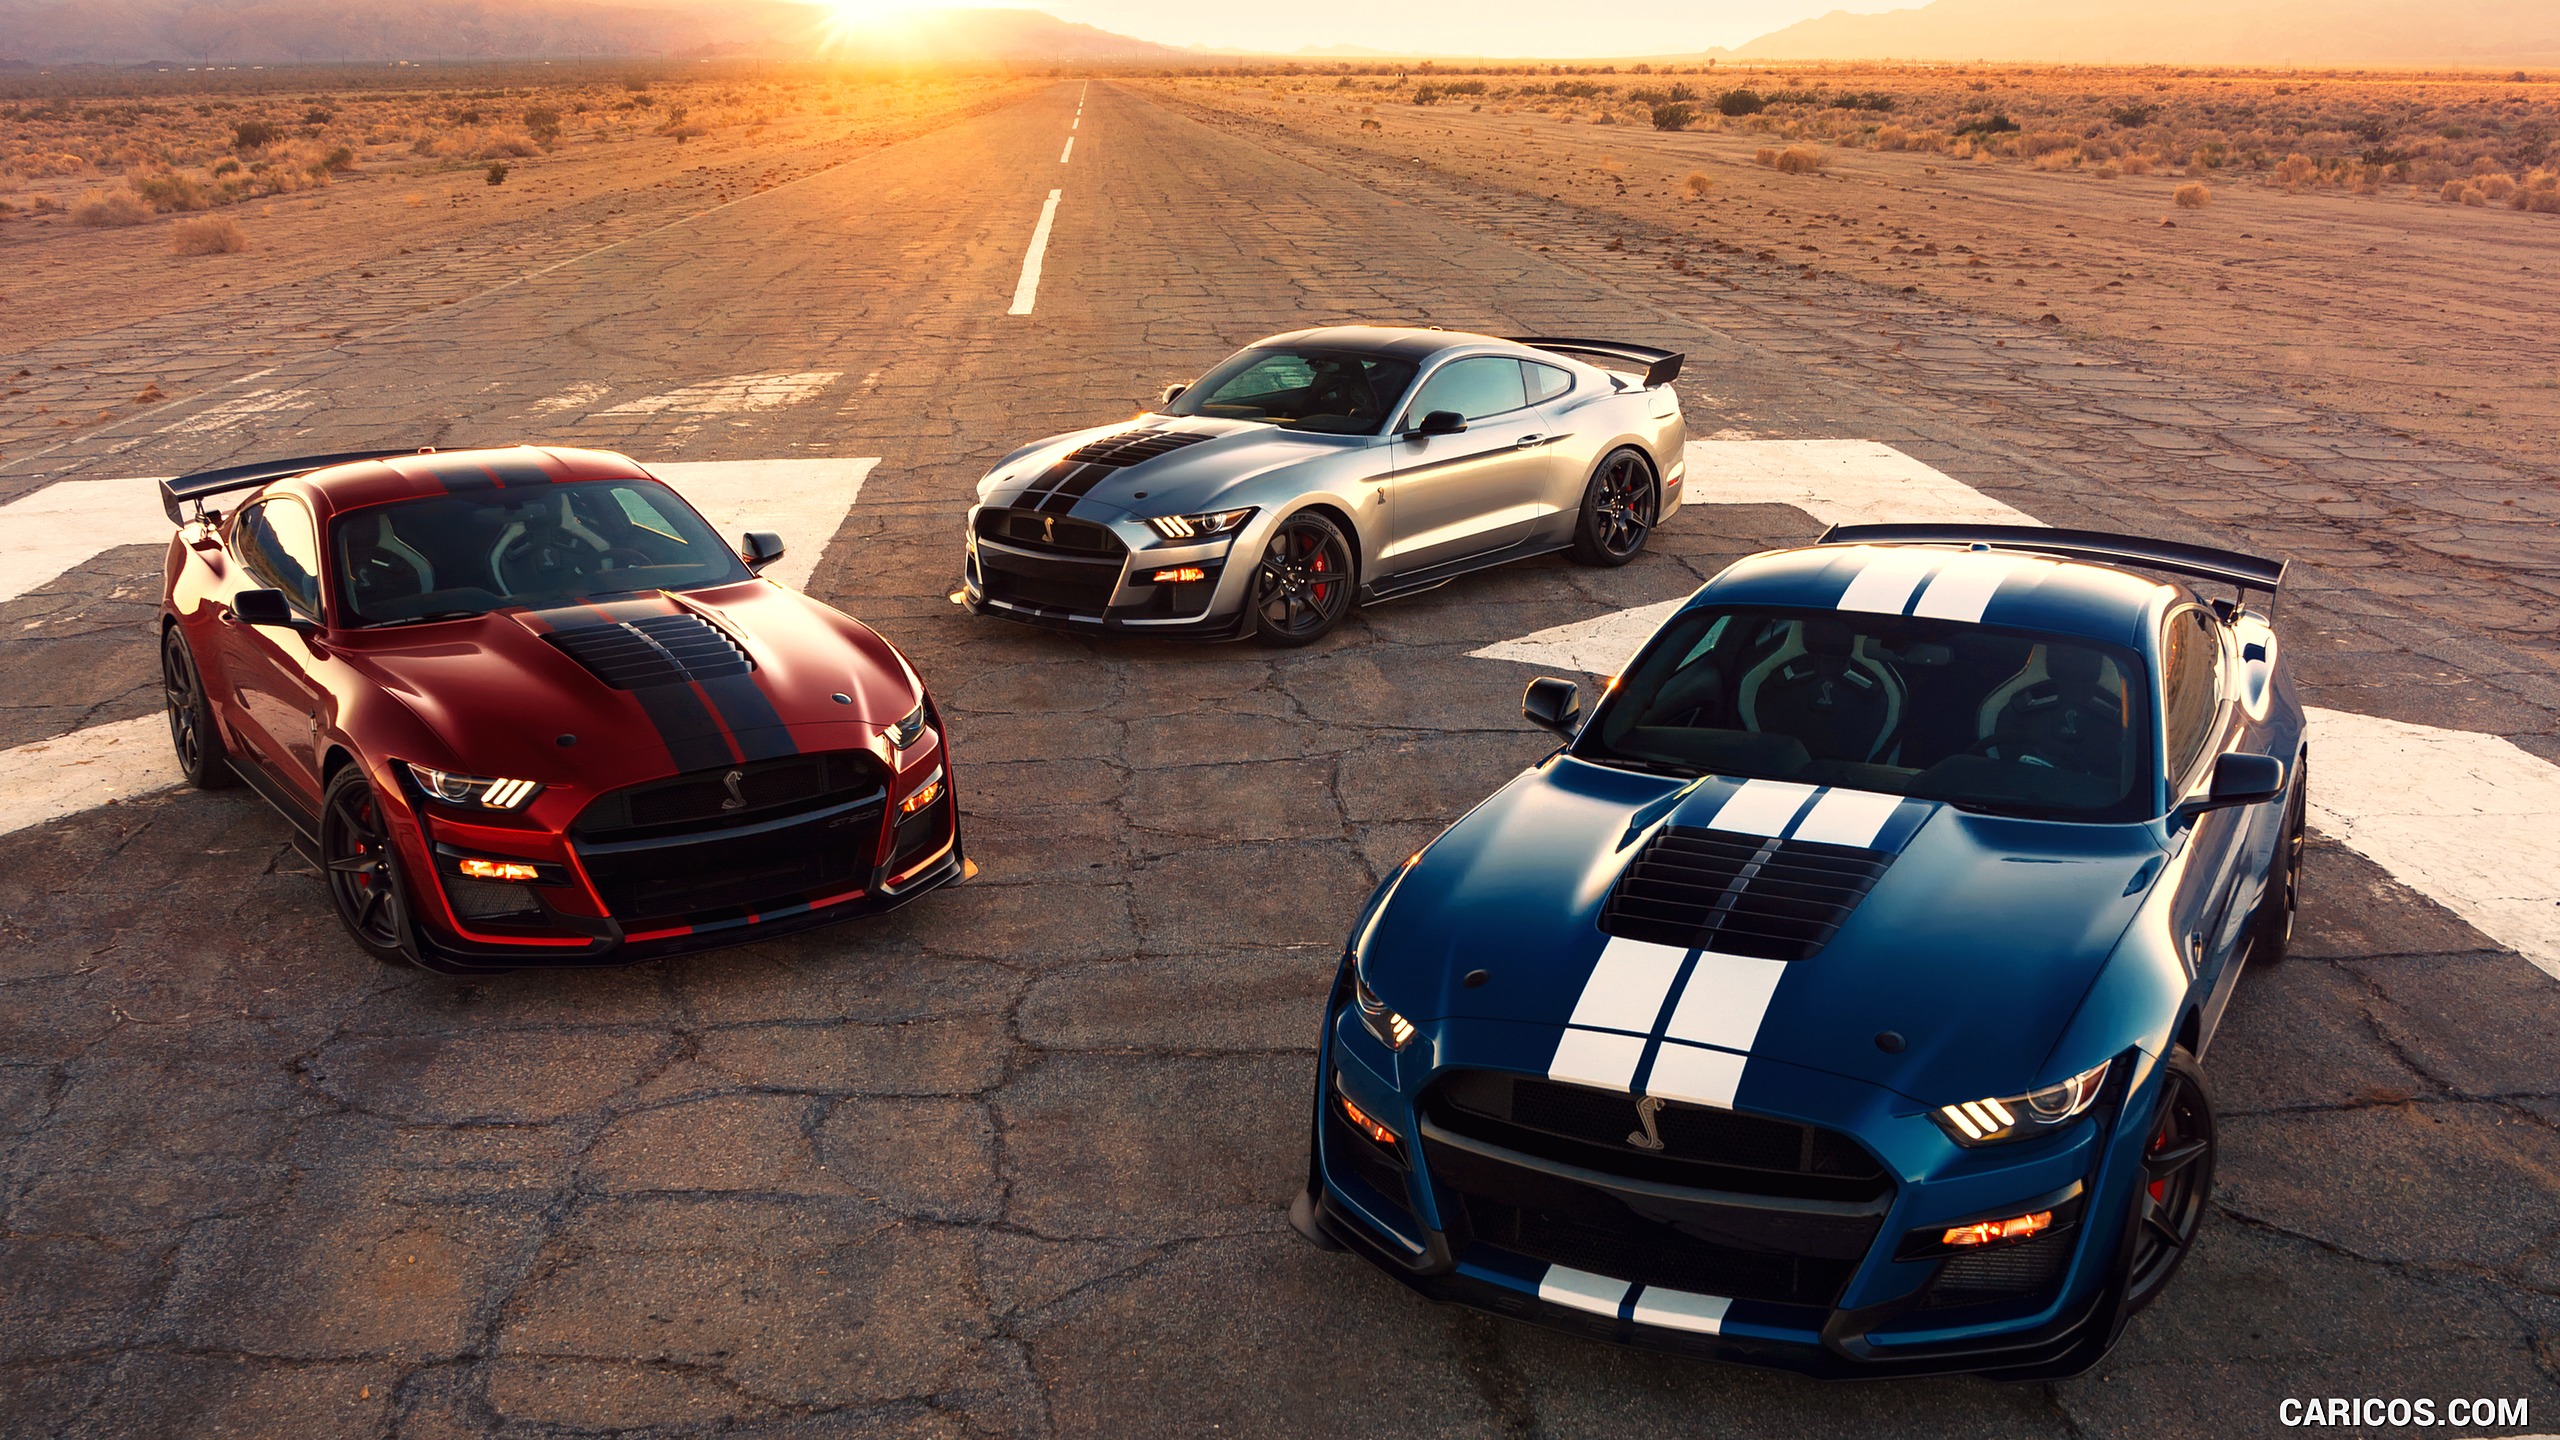 Ford Mustang Shelby Gt500 Wallpapers - Wallpaper Cave